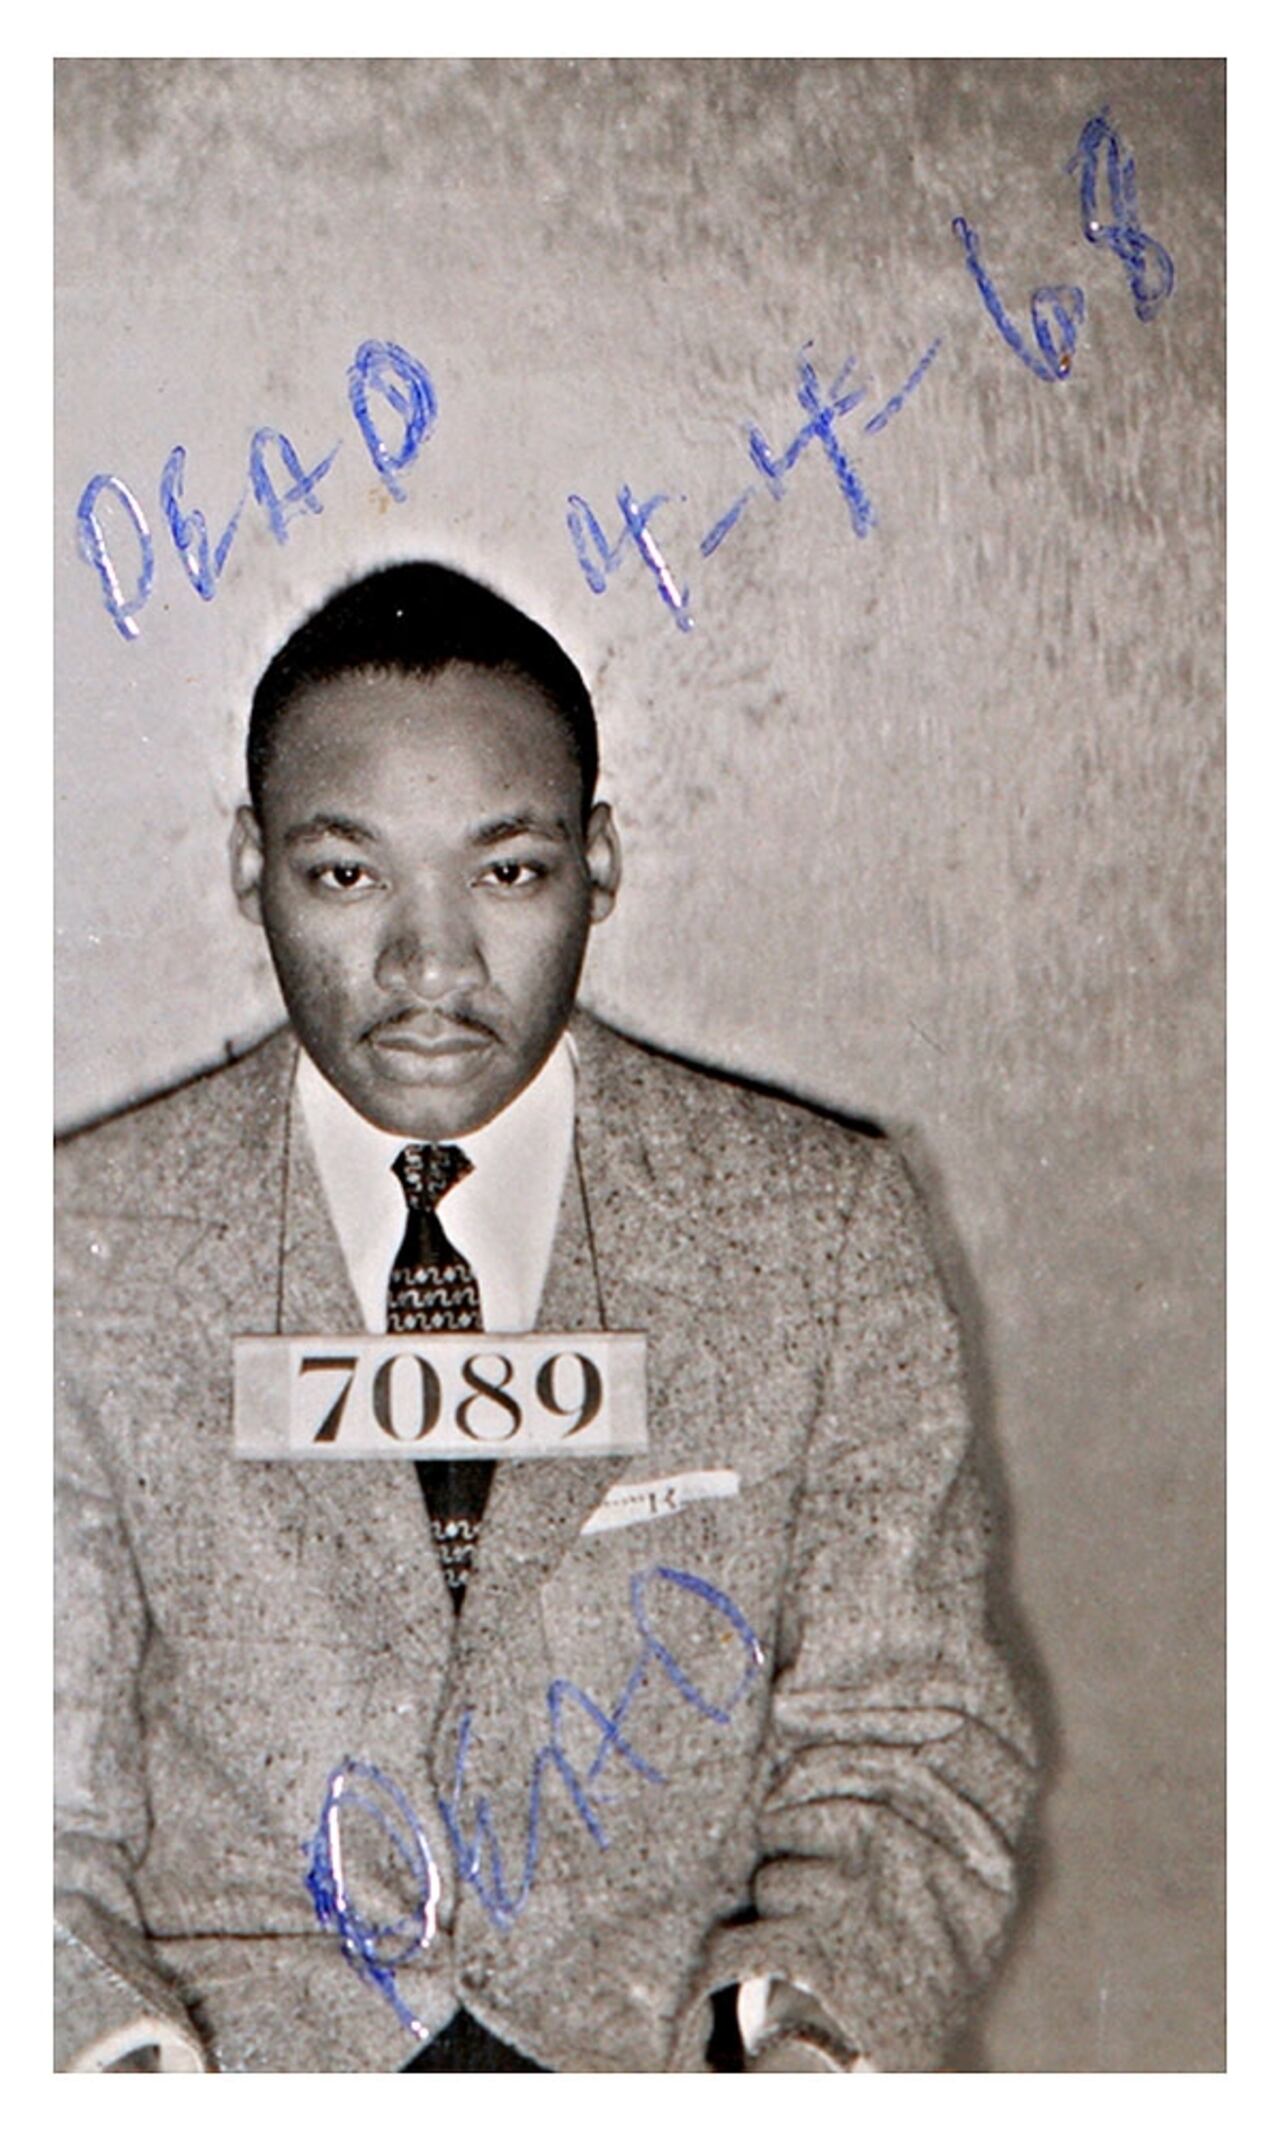 Ficha policial de Martin Luther King